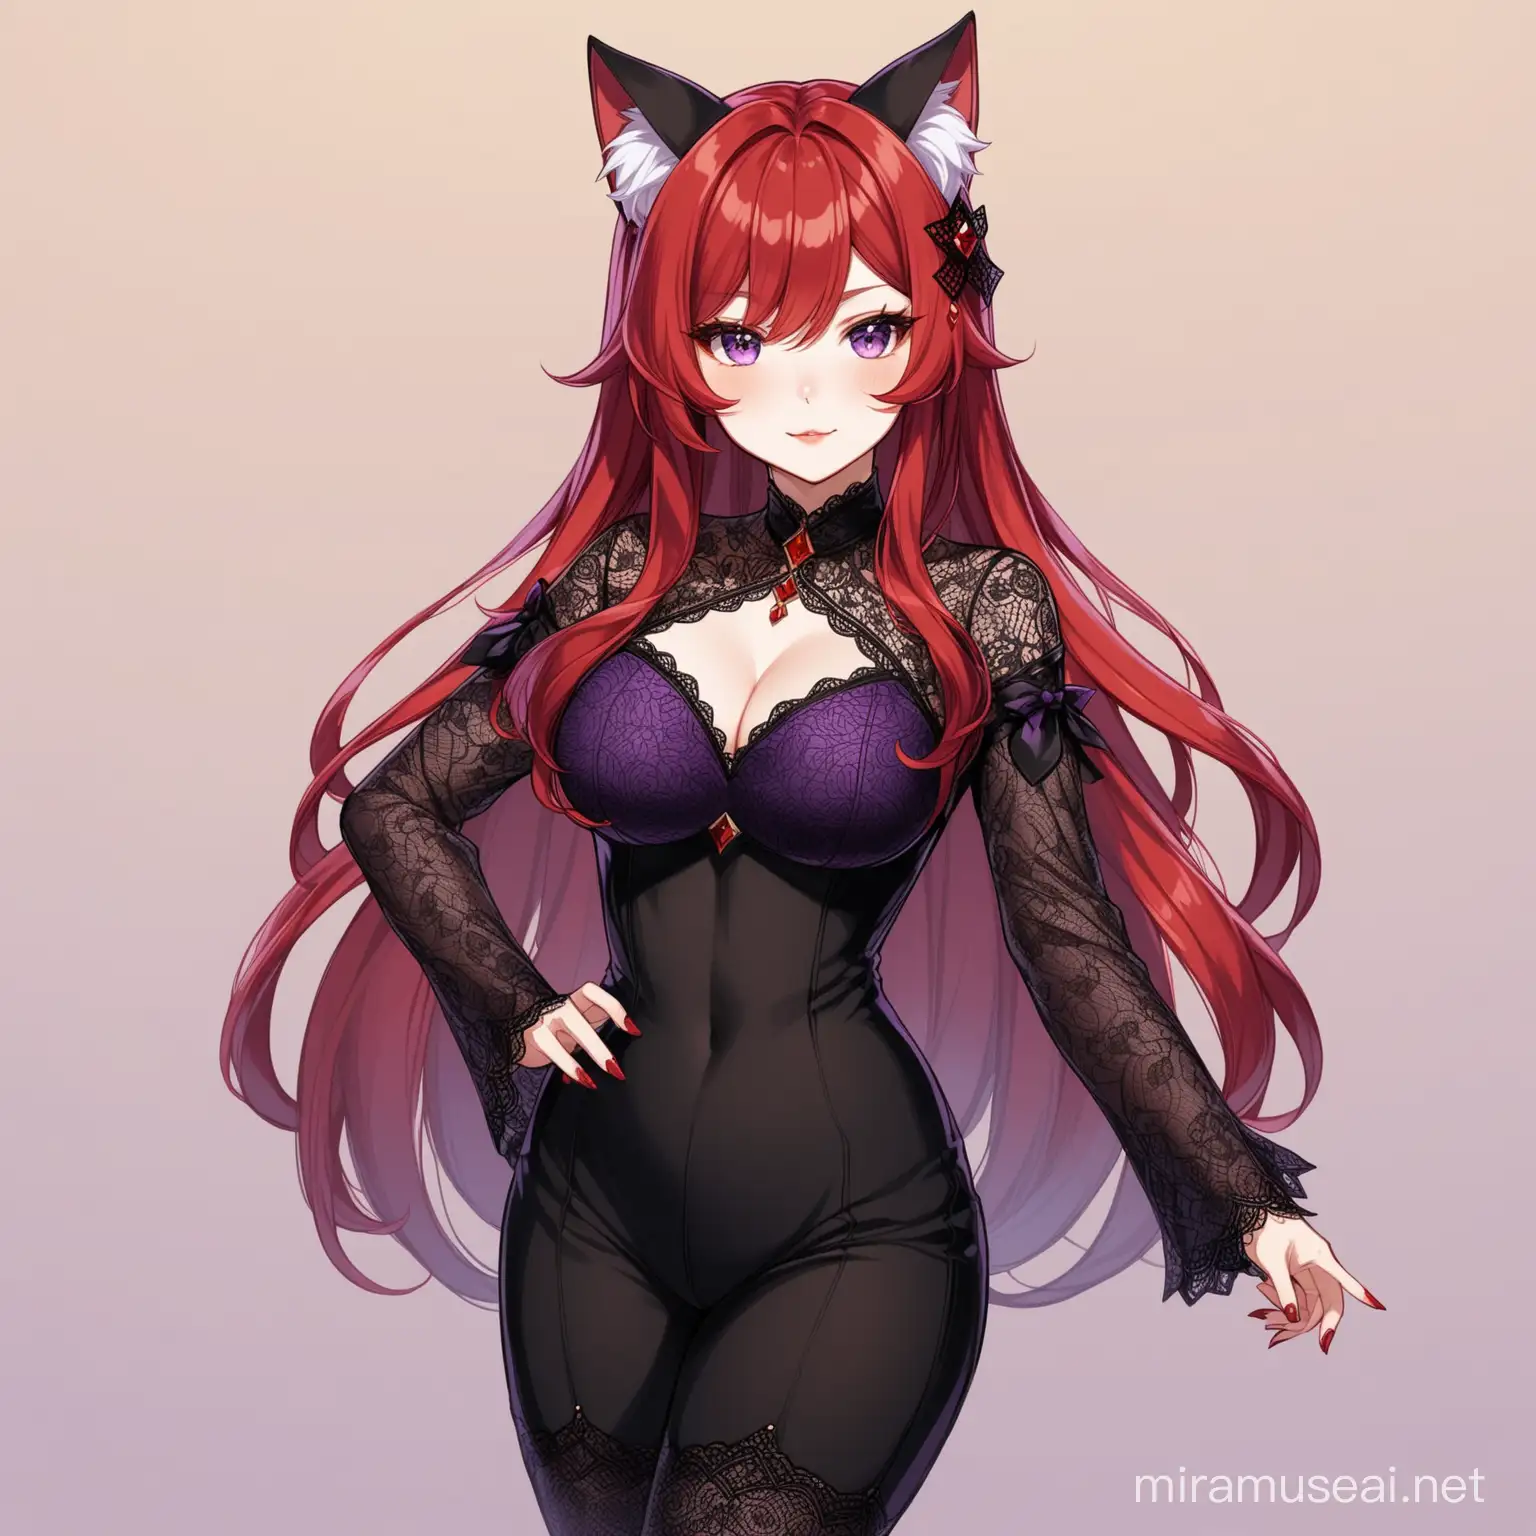 draw a character you'd see in genshin impact with red cat ears, long red and purple hair, mature, black lace outfit